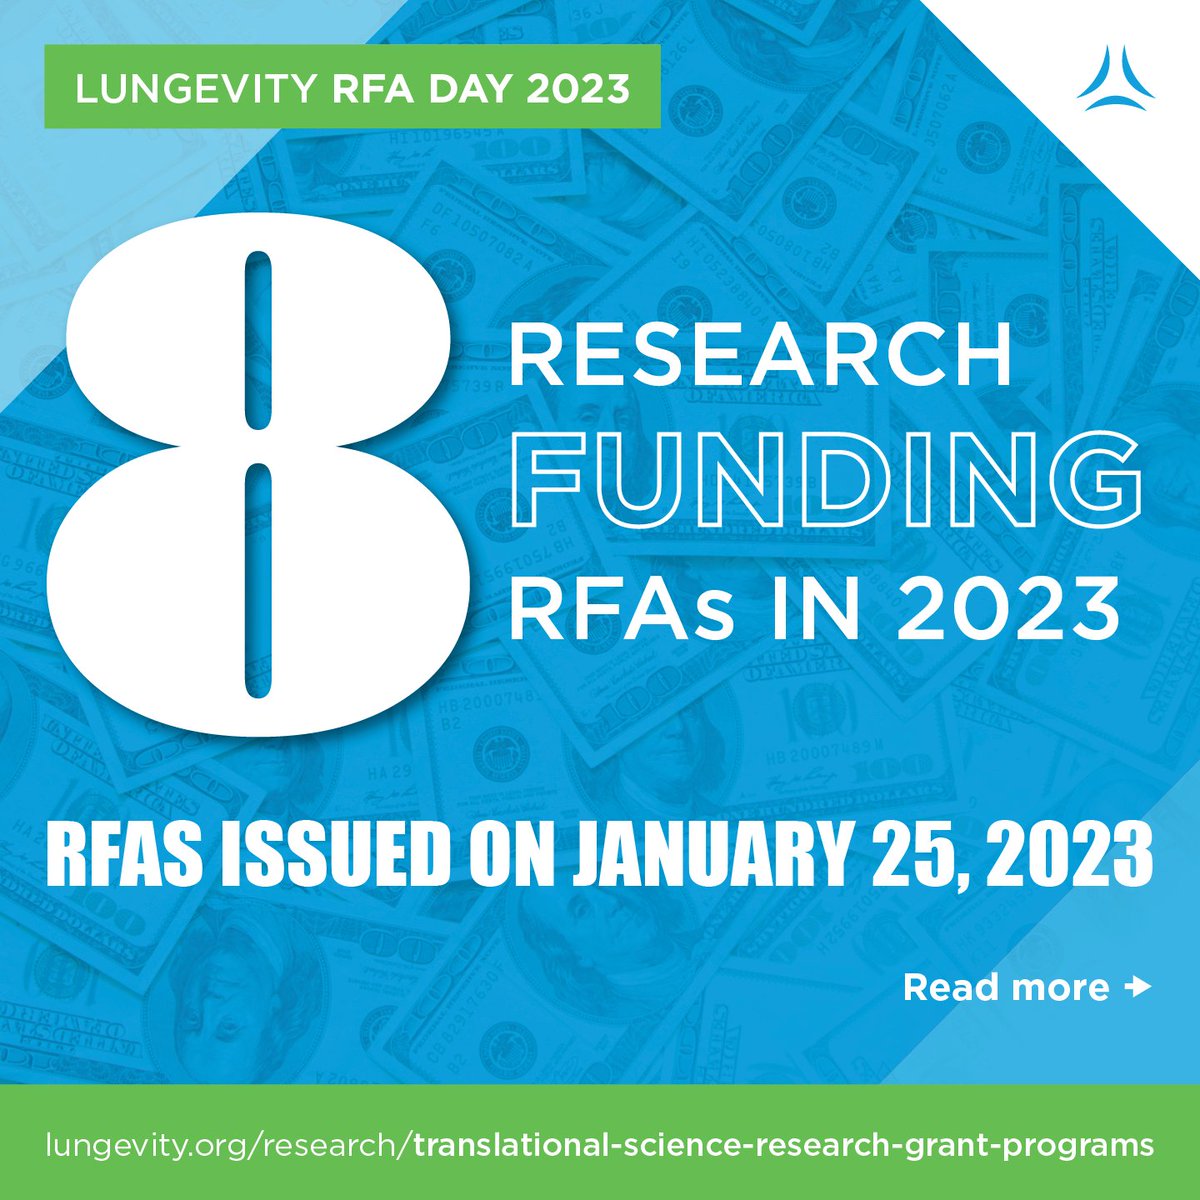 This year, LUNGevity is pleased to issue 8 research funding RFAs! bit.ly/2X7P3na #LUNGevityResearch #RFADAY (1/3)